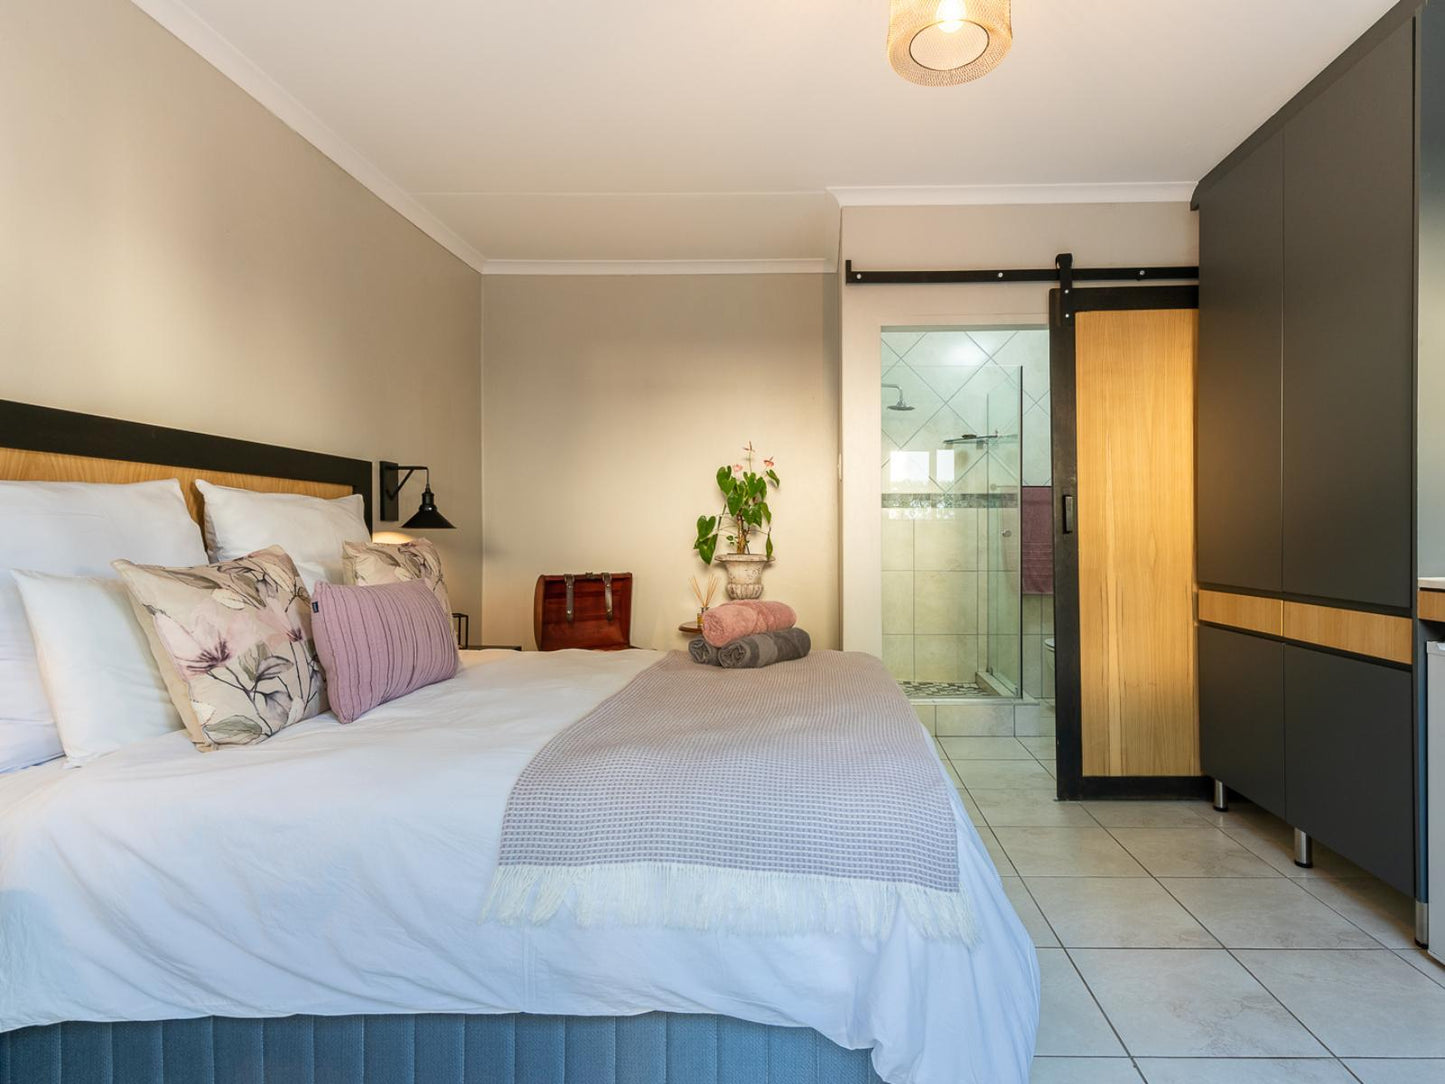 Premium Queen Room with Shower @ Magnolia Guesthouse